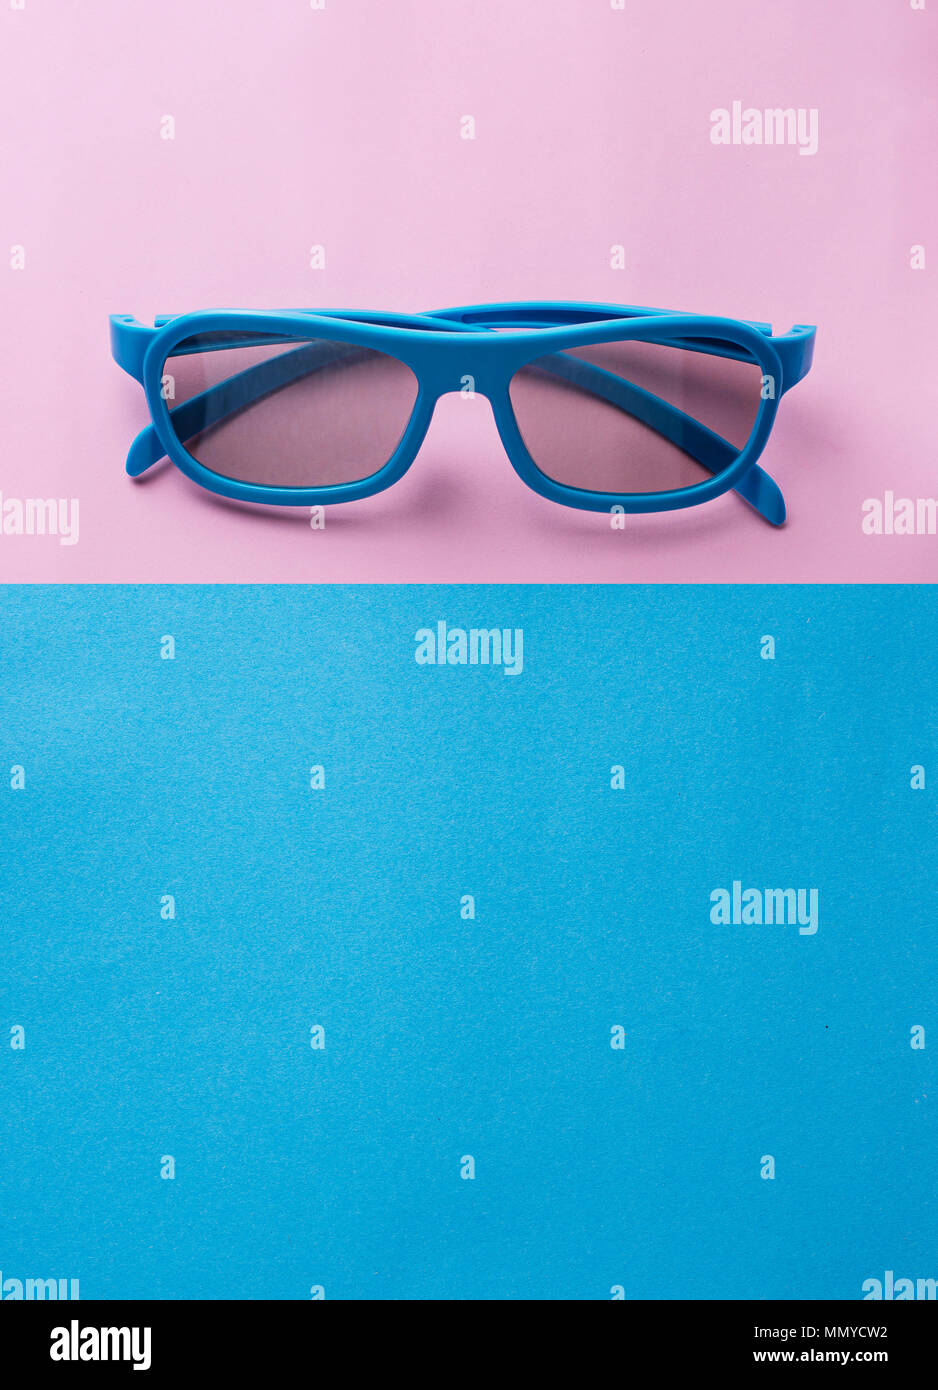 Sunglasses on blue and pink background Stock Photo